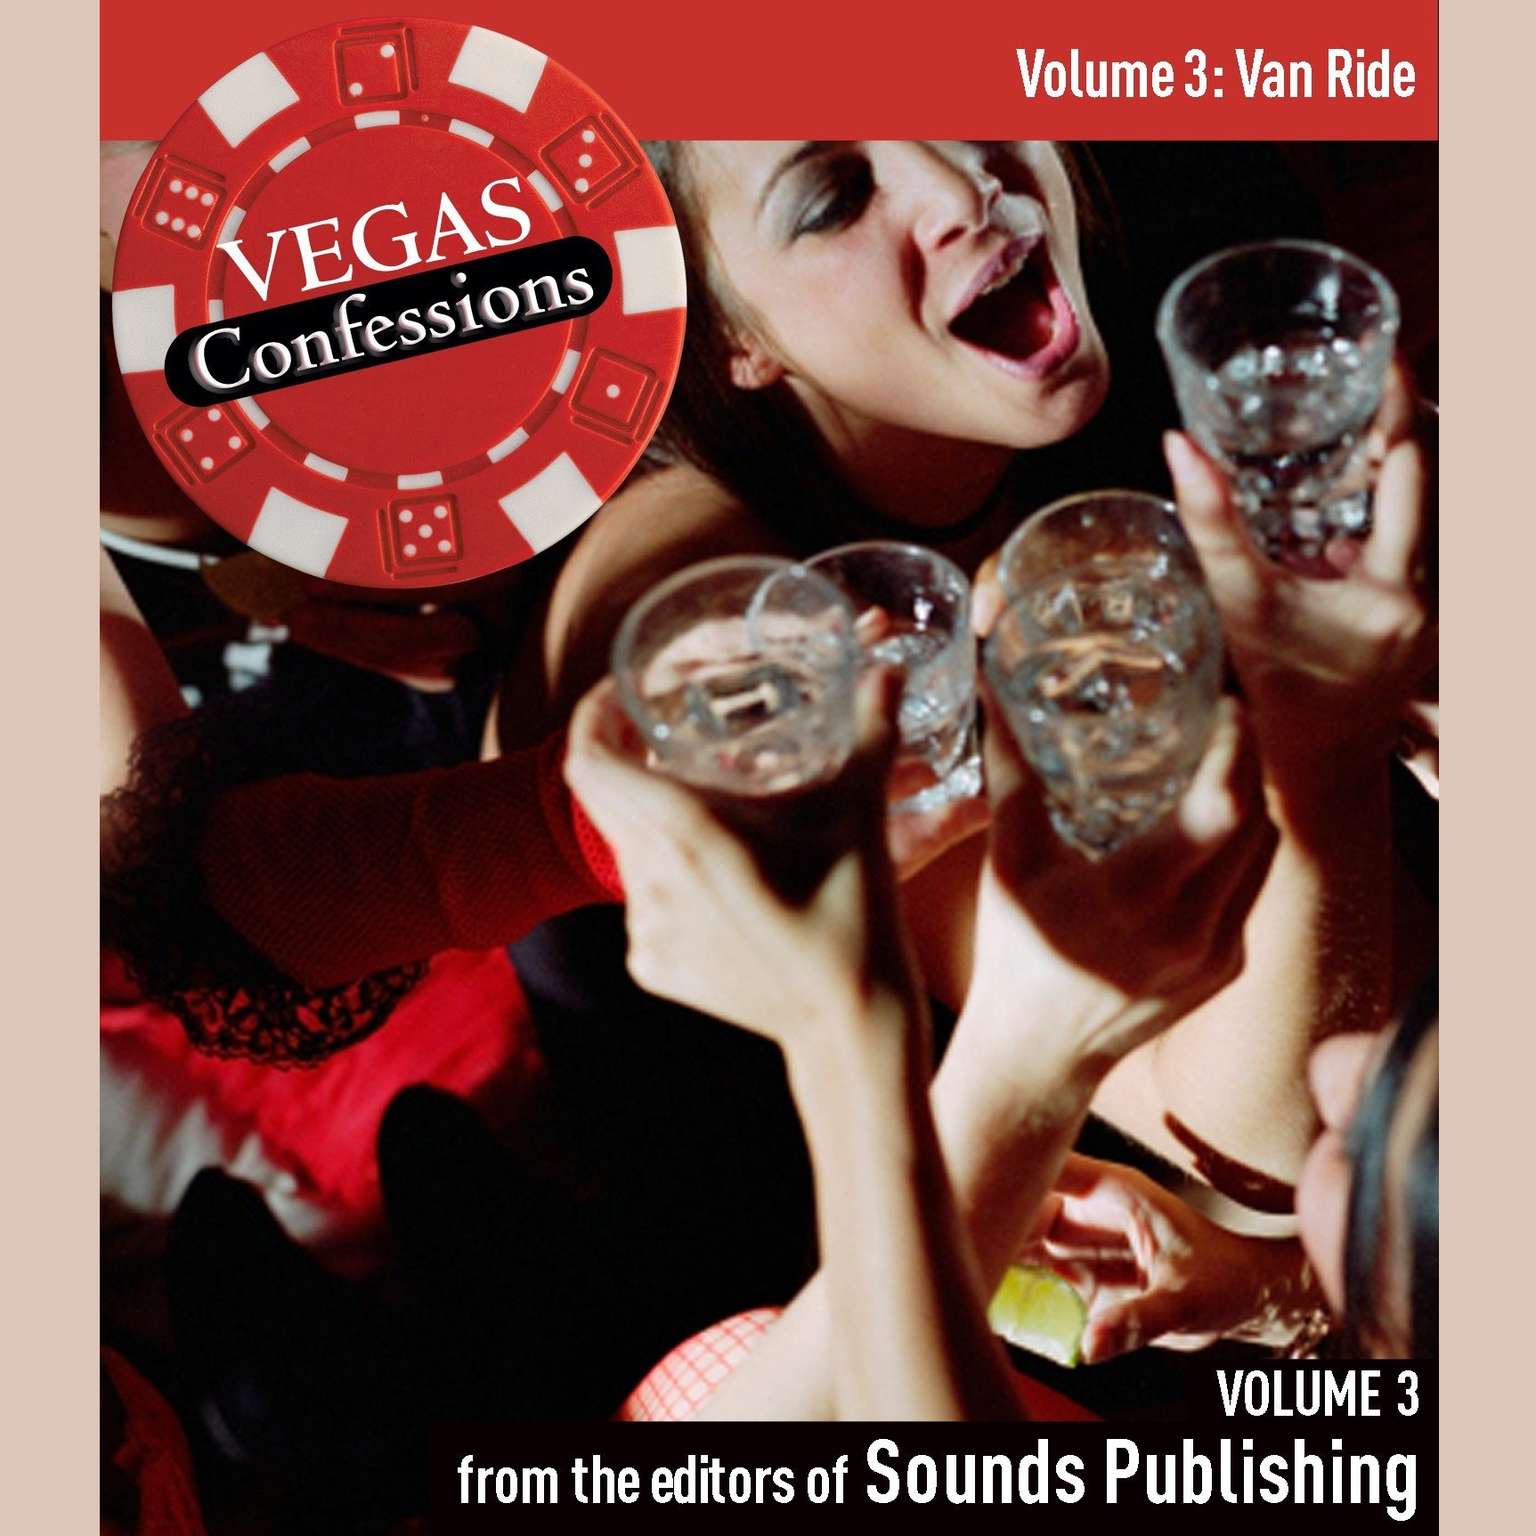 Vegas Confessions 3: Van Ride Audiobook, by The Editors of Sounds Publishing